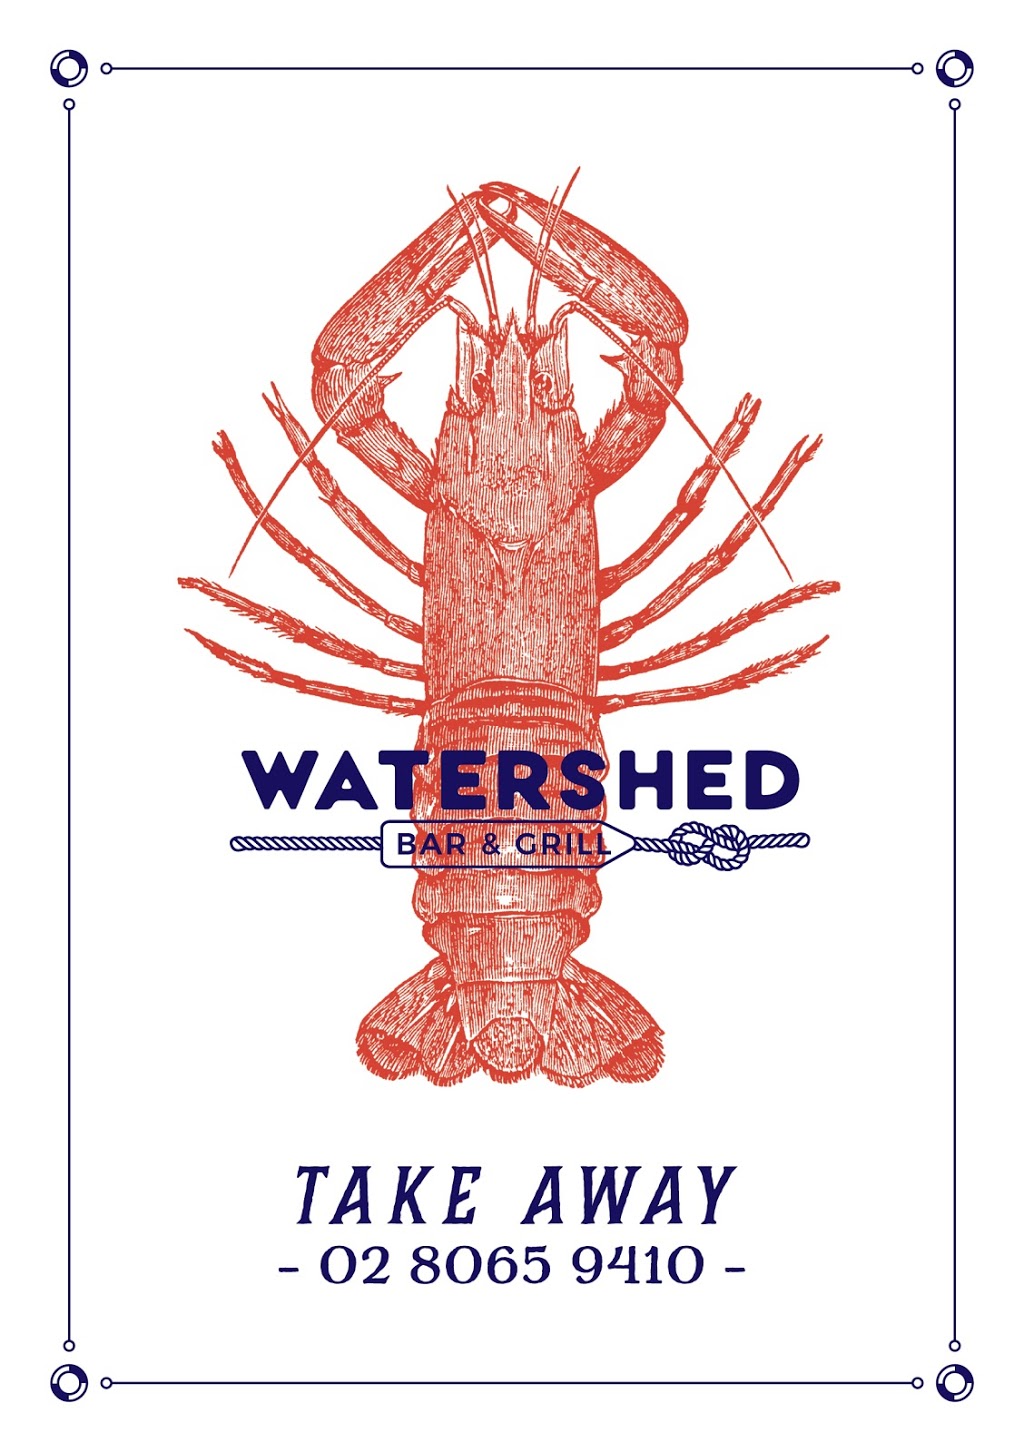 Watershed Bar and Grill | restaurant | Shop 1, Stockland, 450-476 Miller St, Cammeray NSW 2062, Australia | 0280659410 OR +61 2 8065 9410